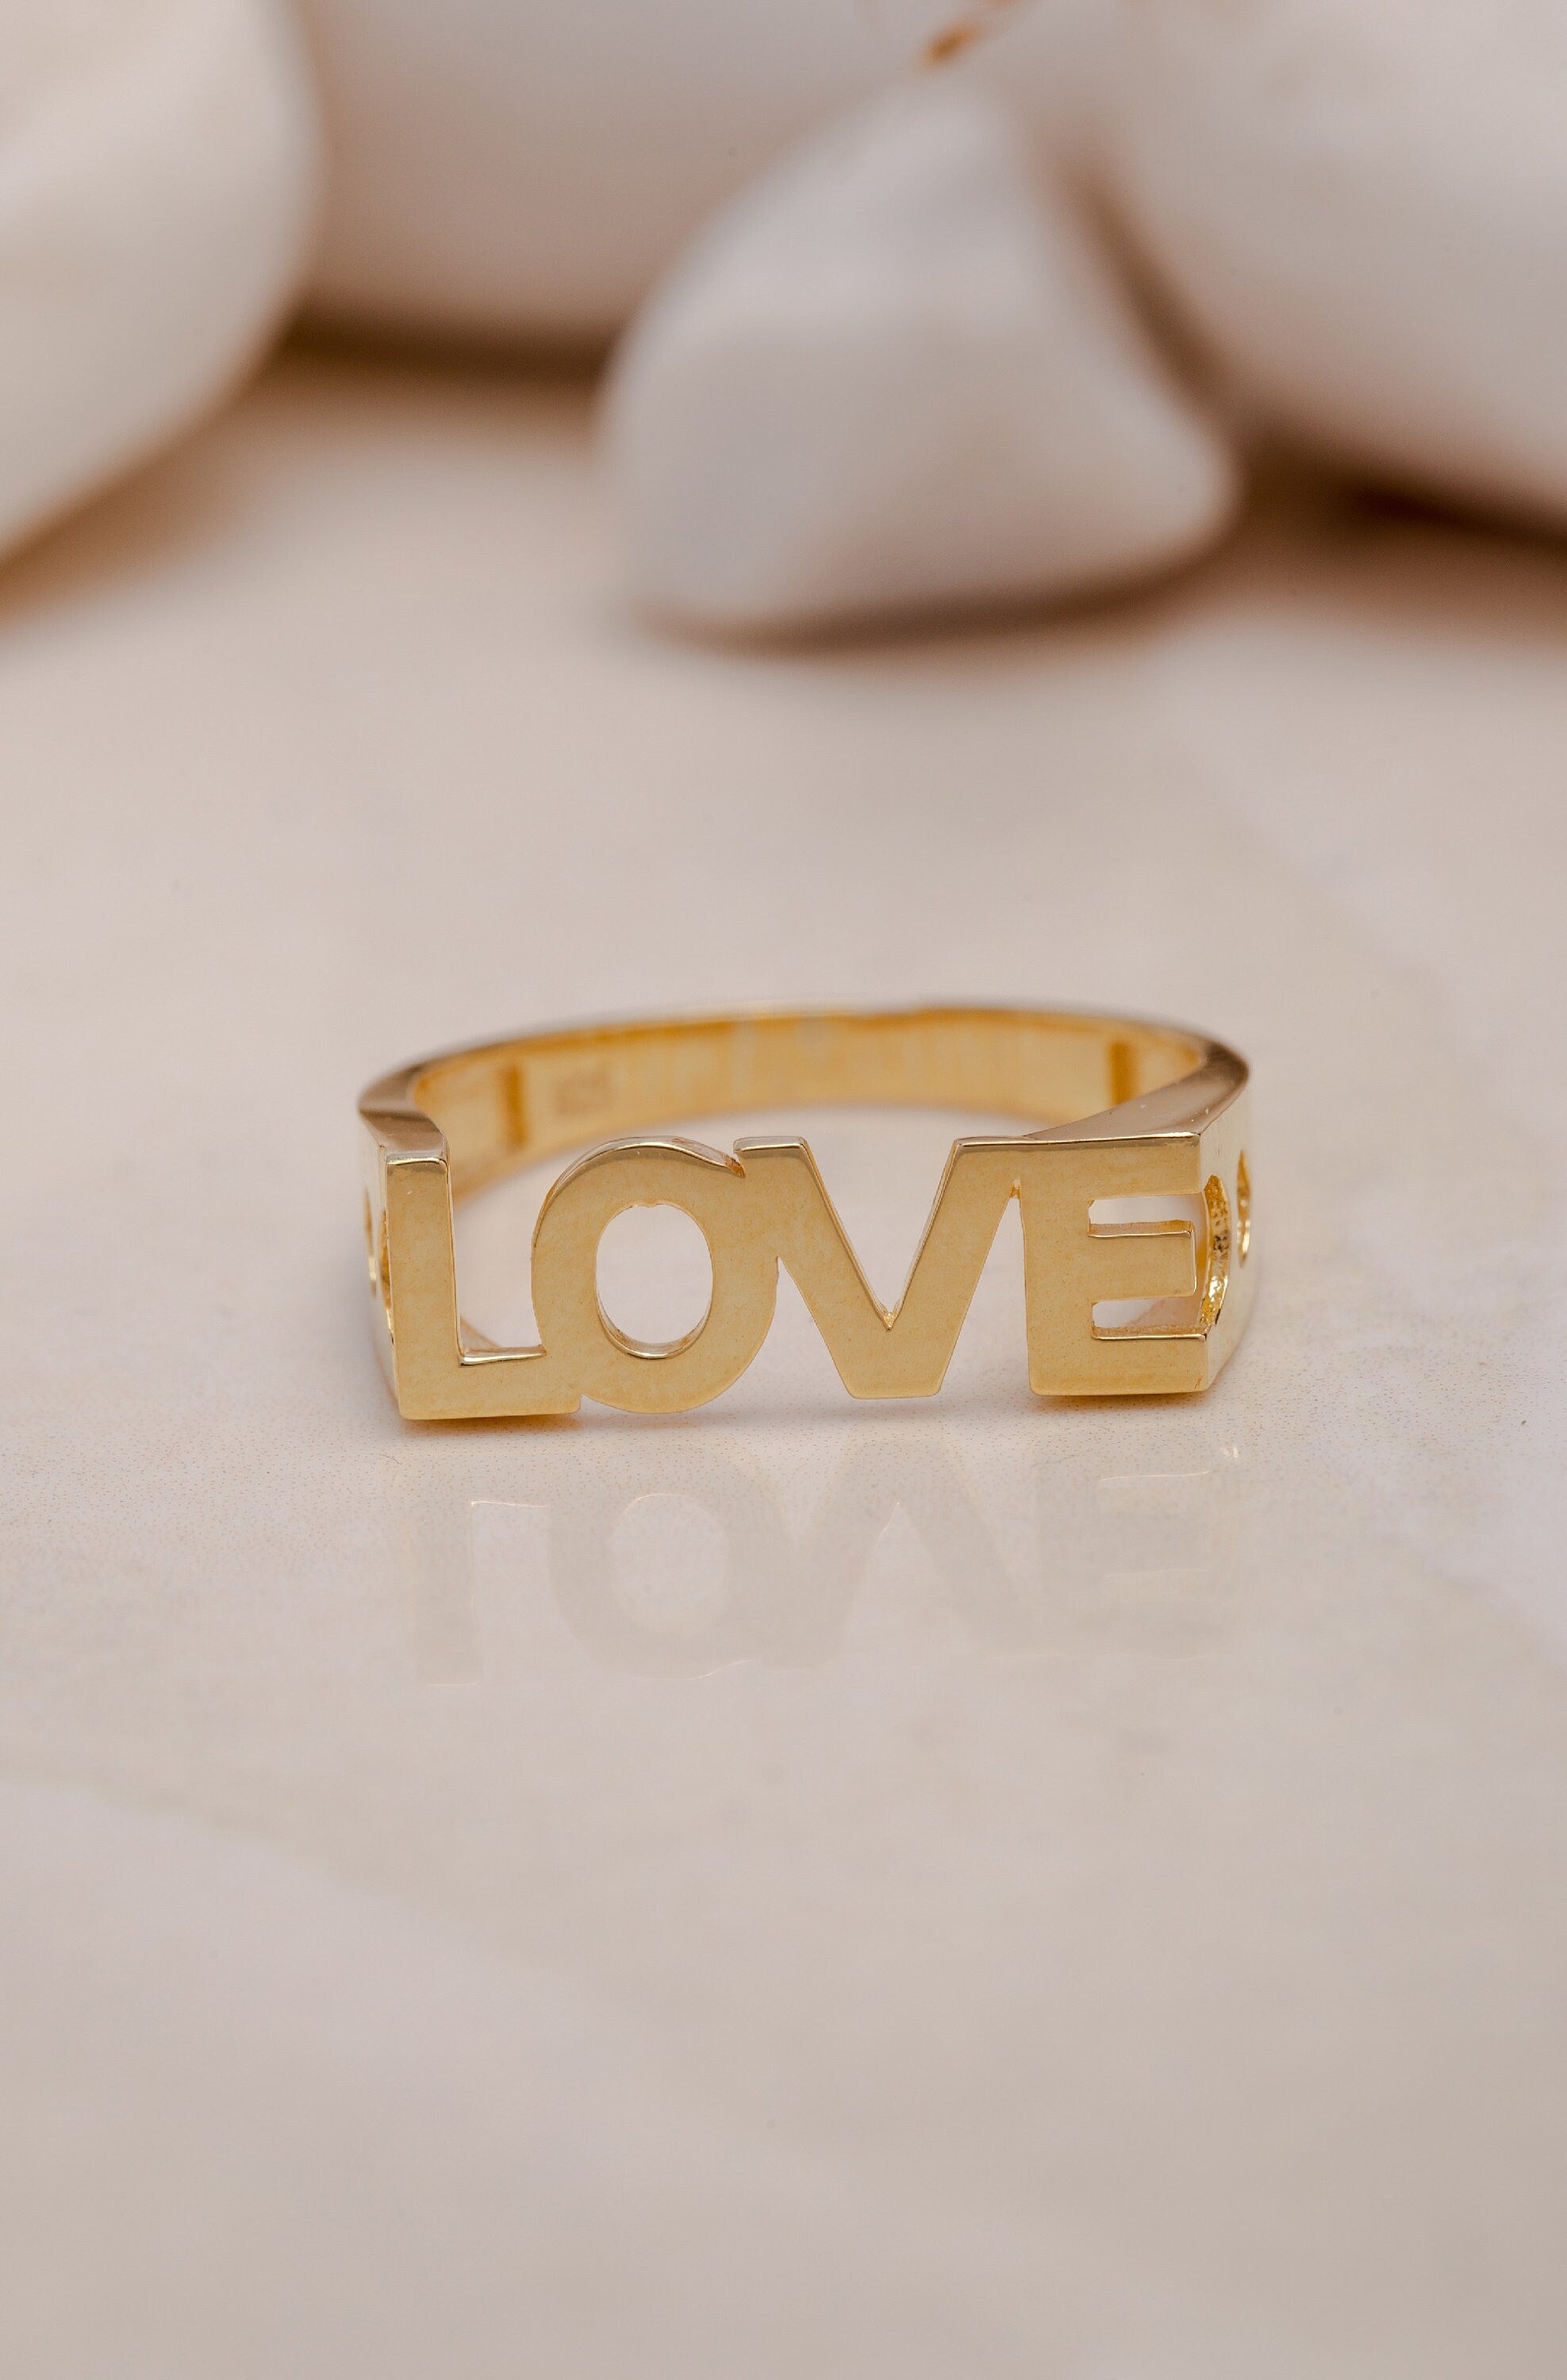 Minimalist Love Ring - 14K Gold or 925 Sterling Silver - Rings for Women - Mother's Day Gift - Love Jewelry - Dainty Gold Ring